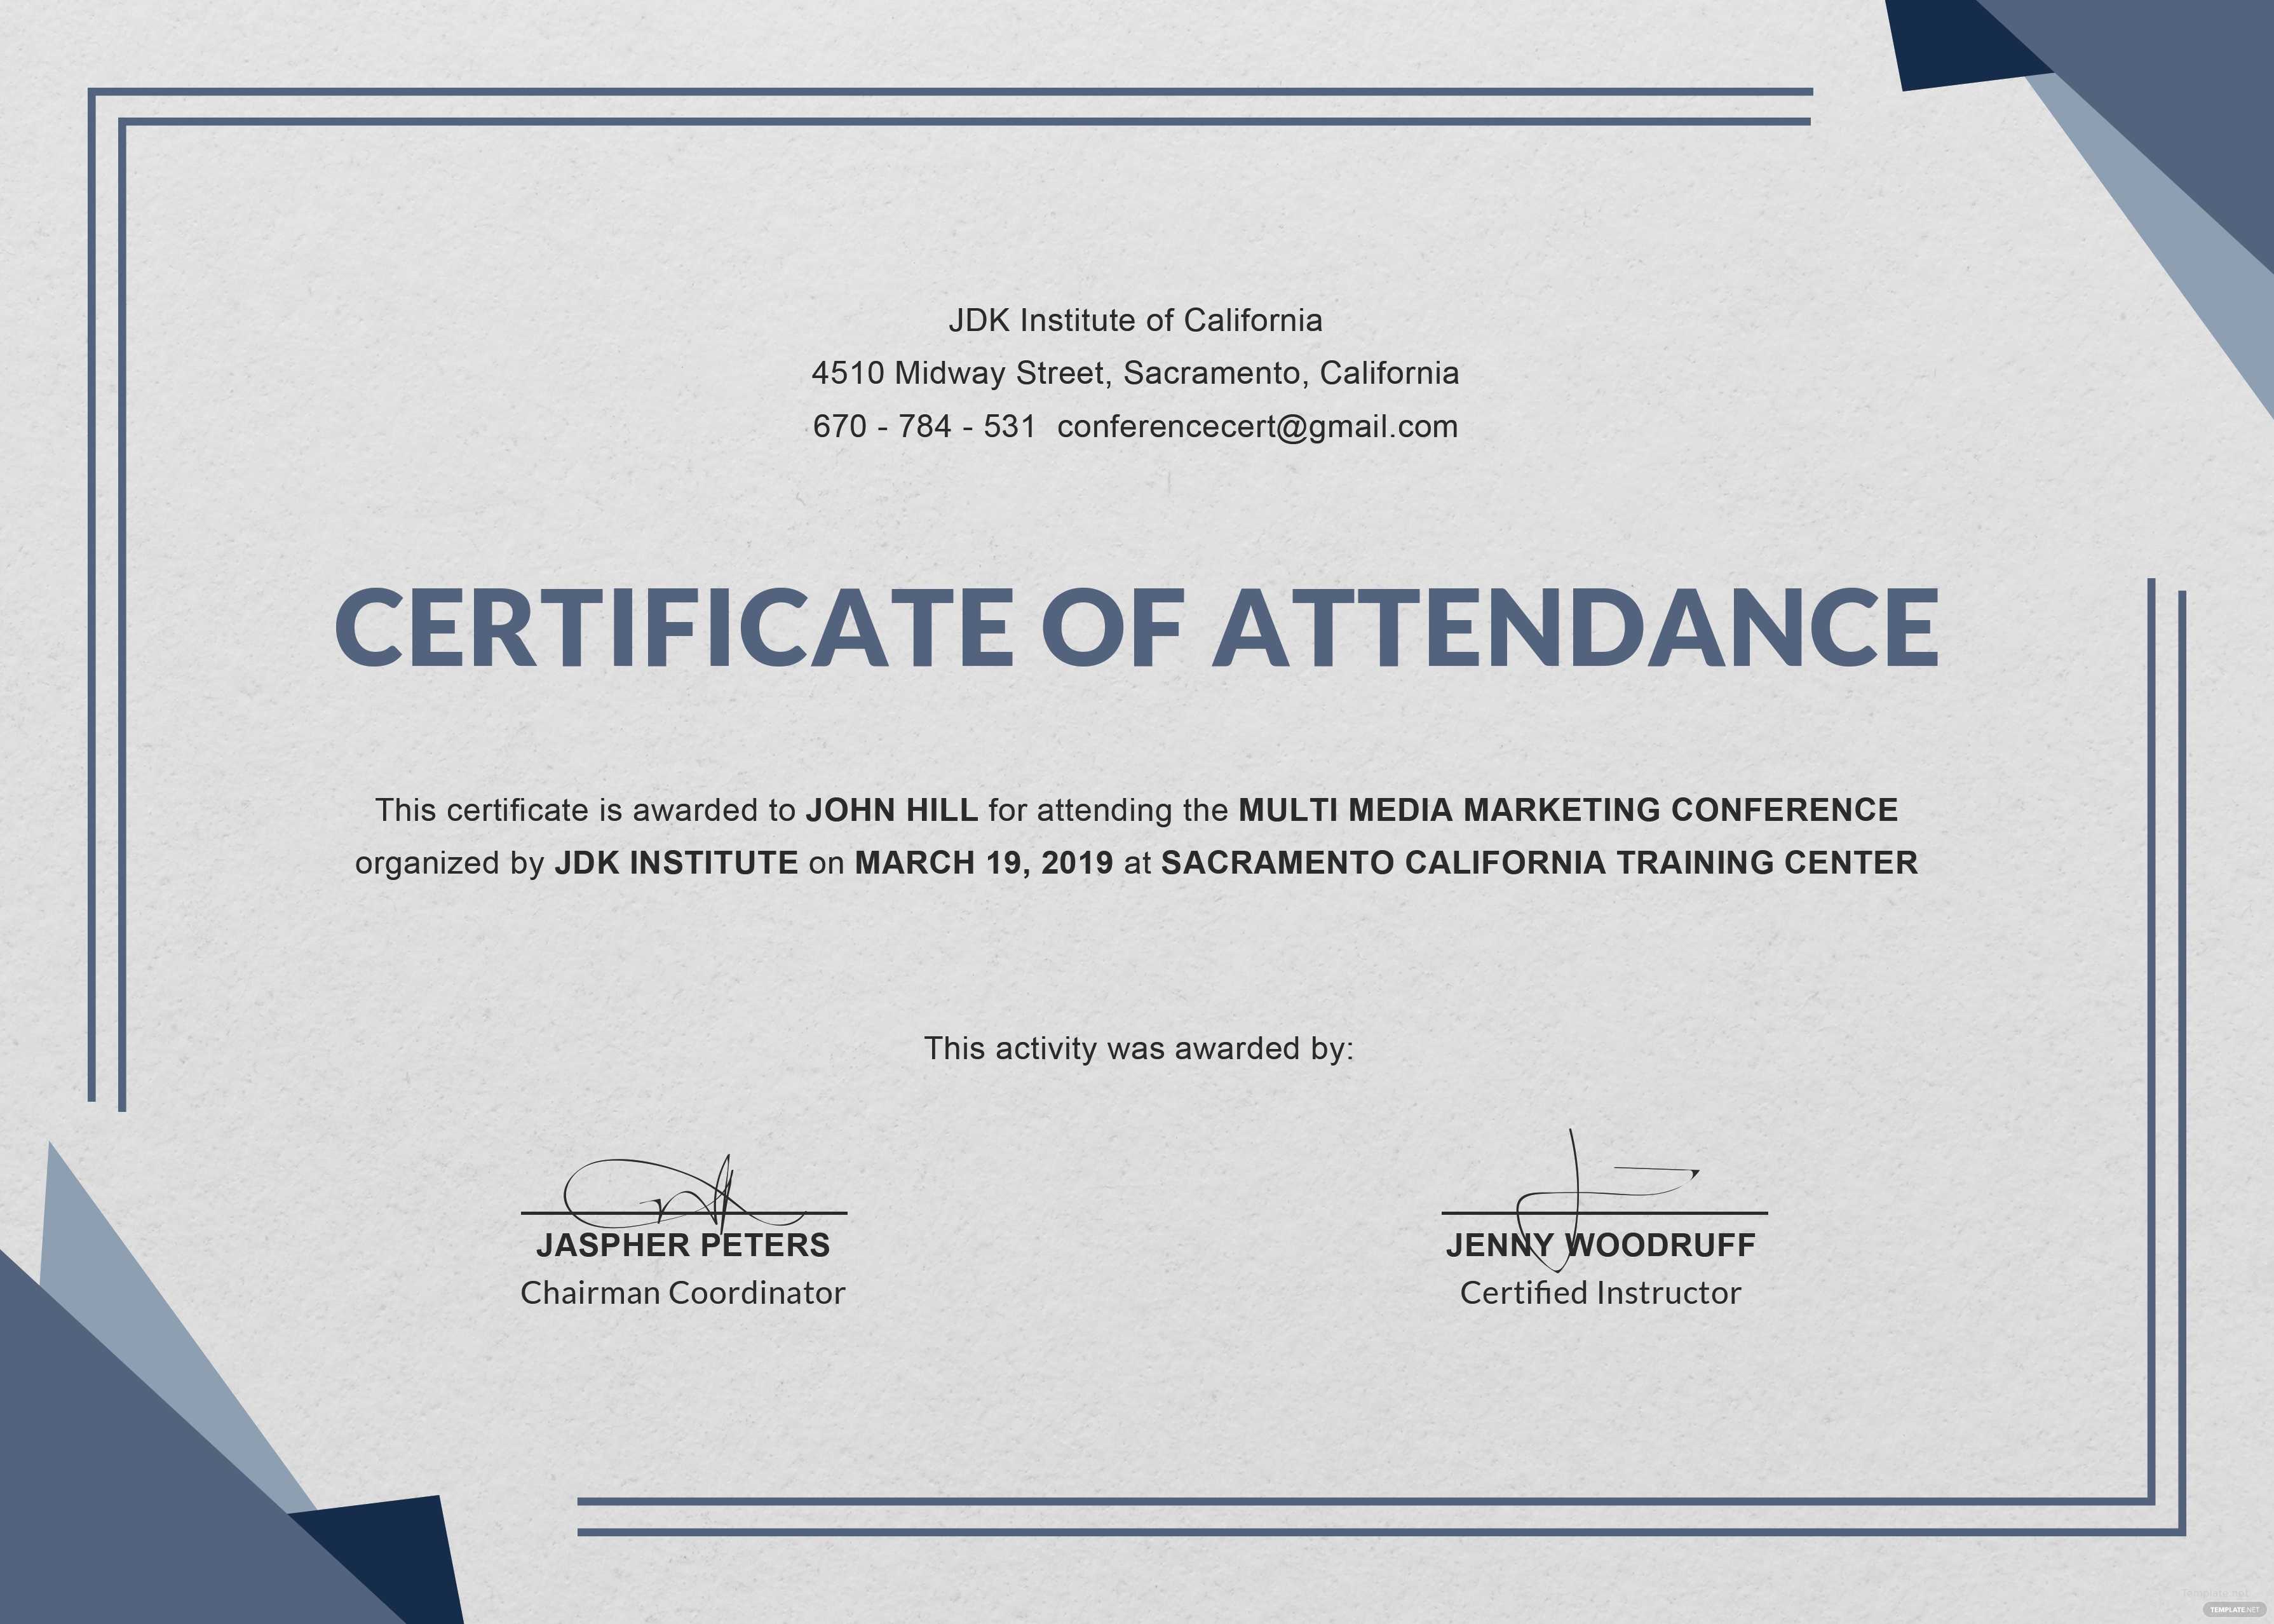 Certificate Templates: Free Conference Attendance Within Conference Certificate Of Attendance Template